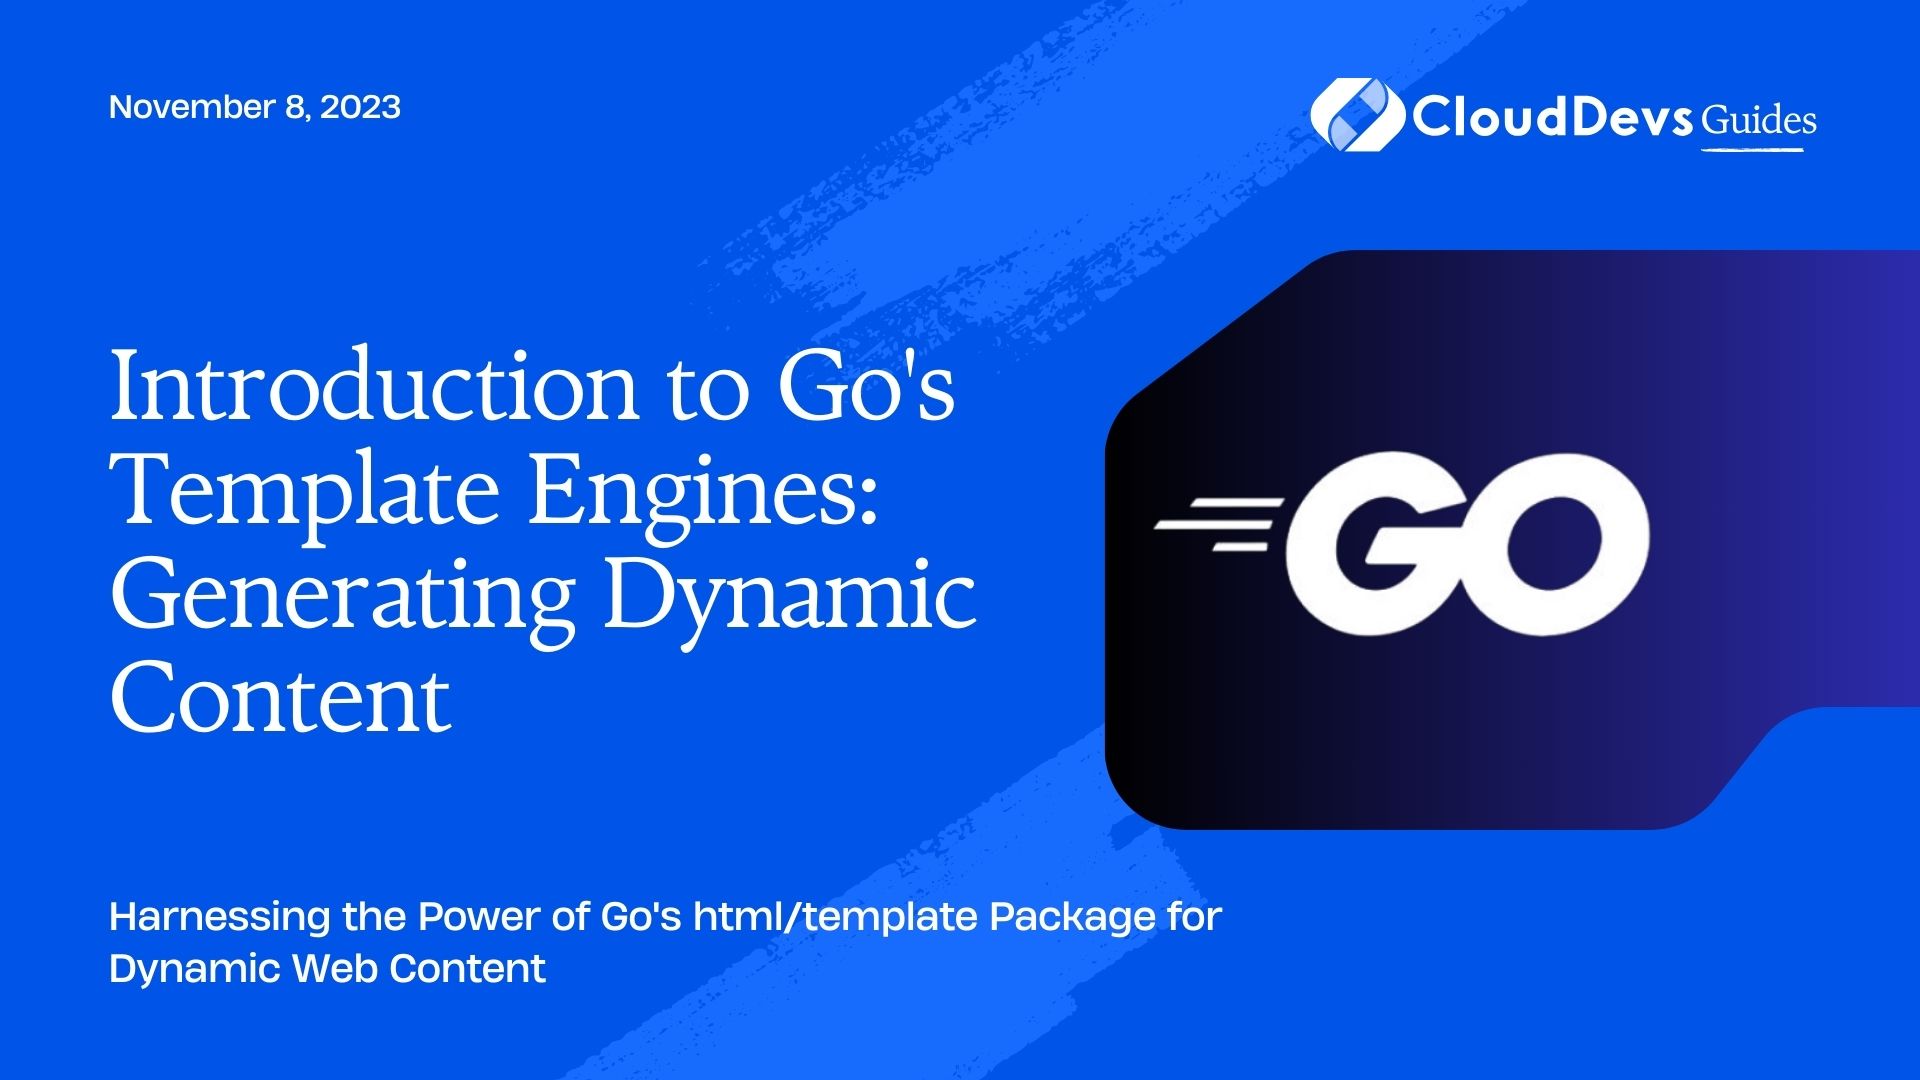 Introduction to Go's Template Engines: Generating Dynamic Content